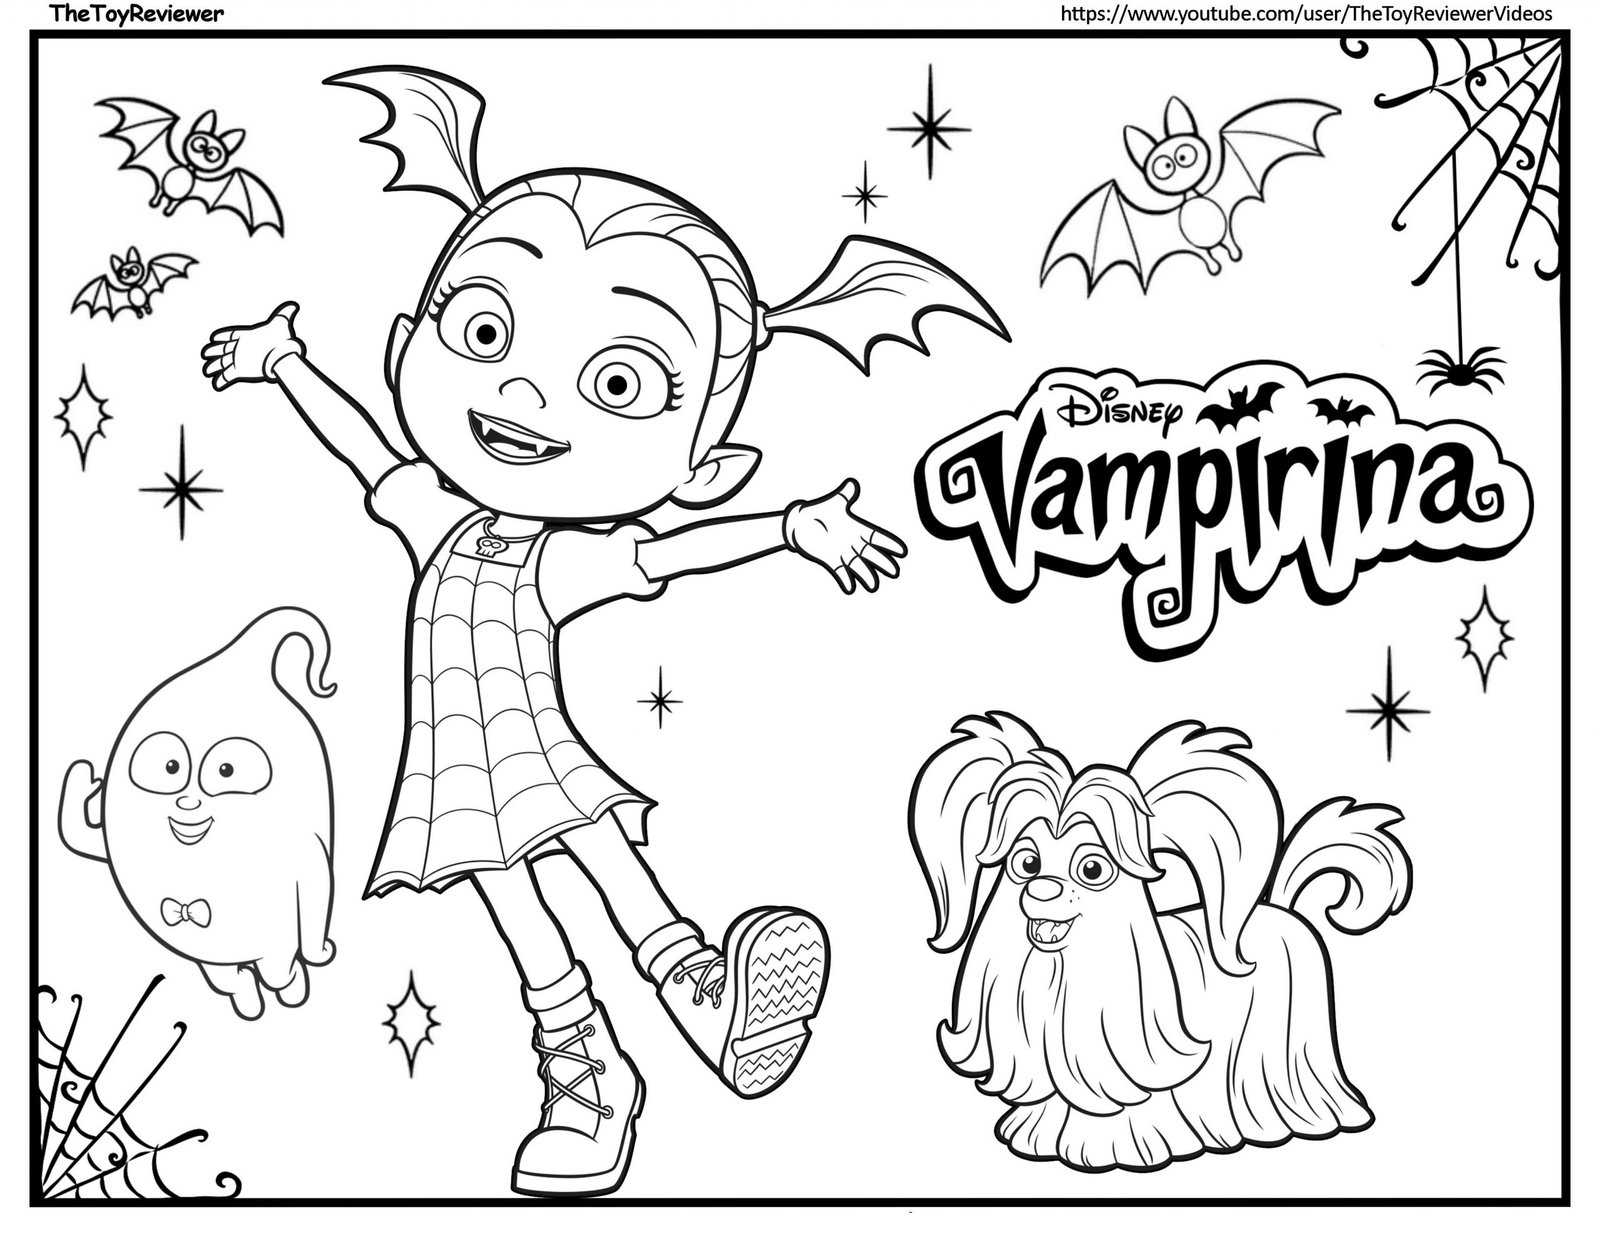 Vampirina coloring pages printable for free download